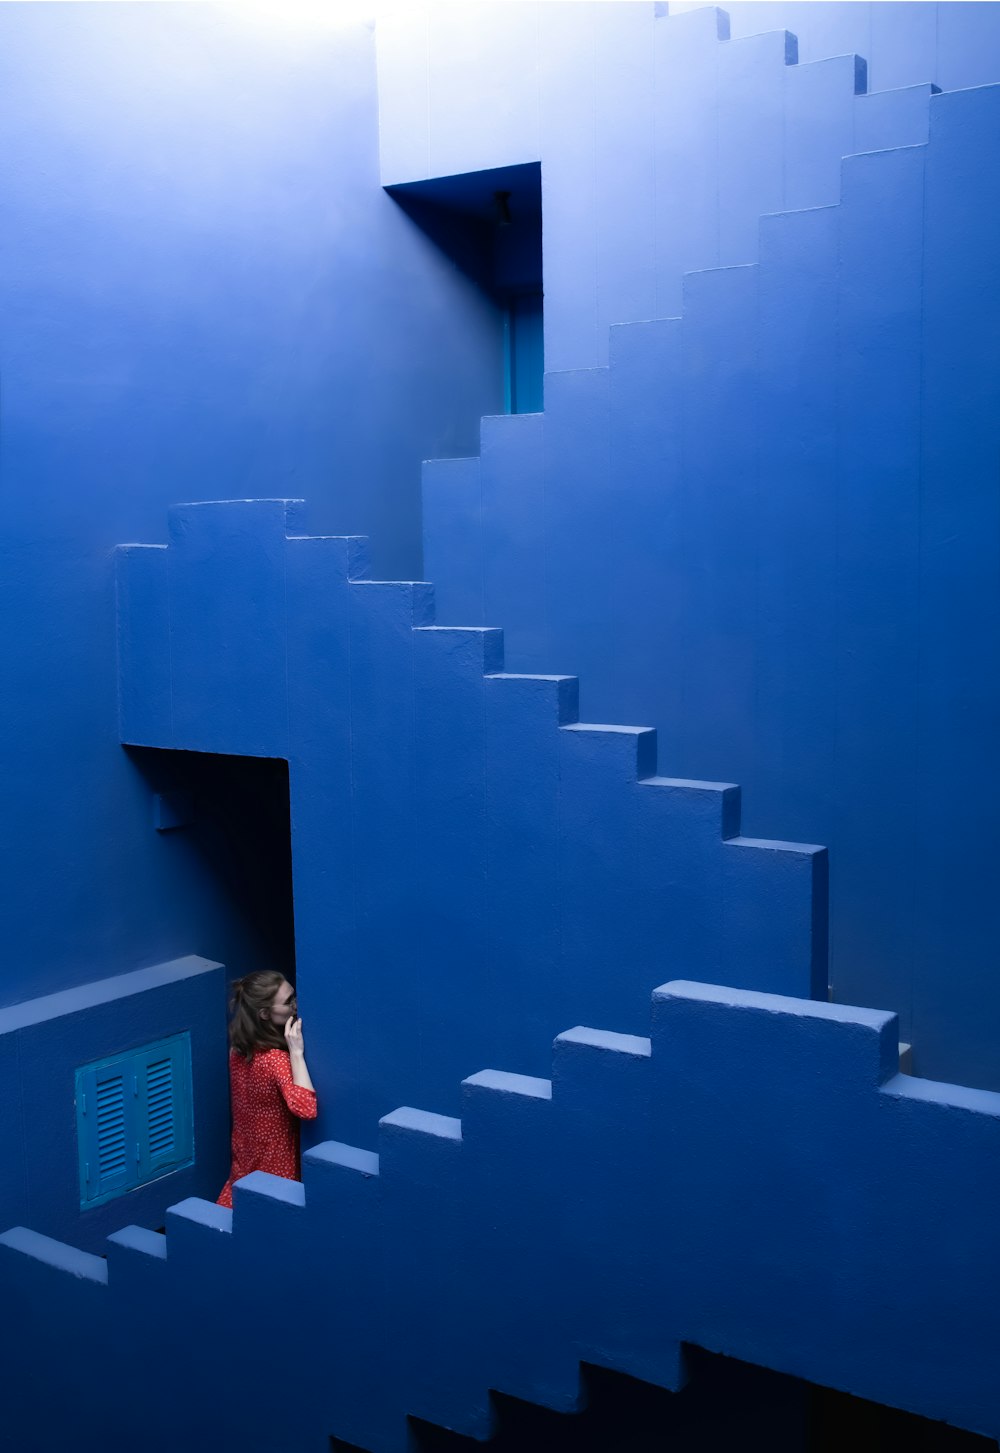 a woman in a red coat is standing on a blue staircase